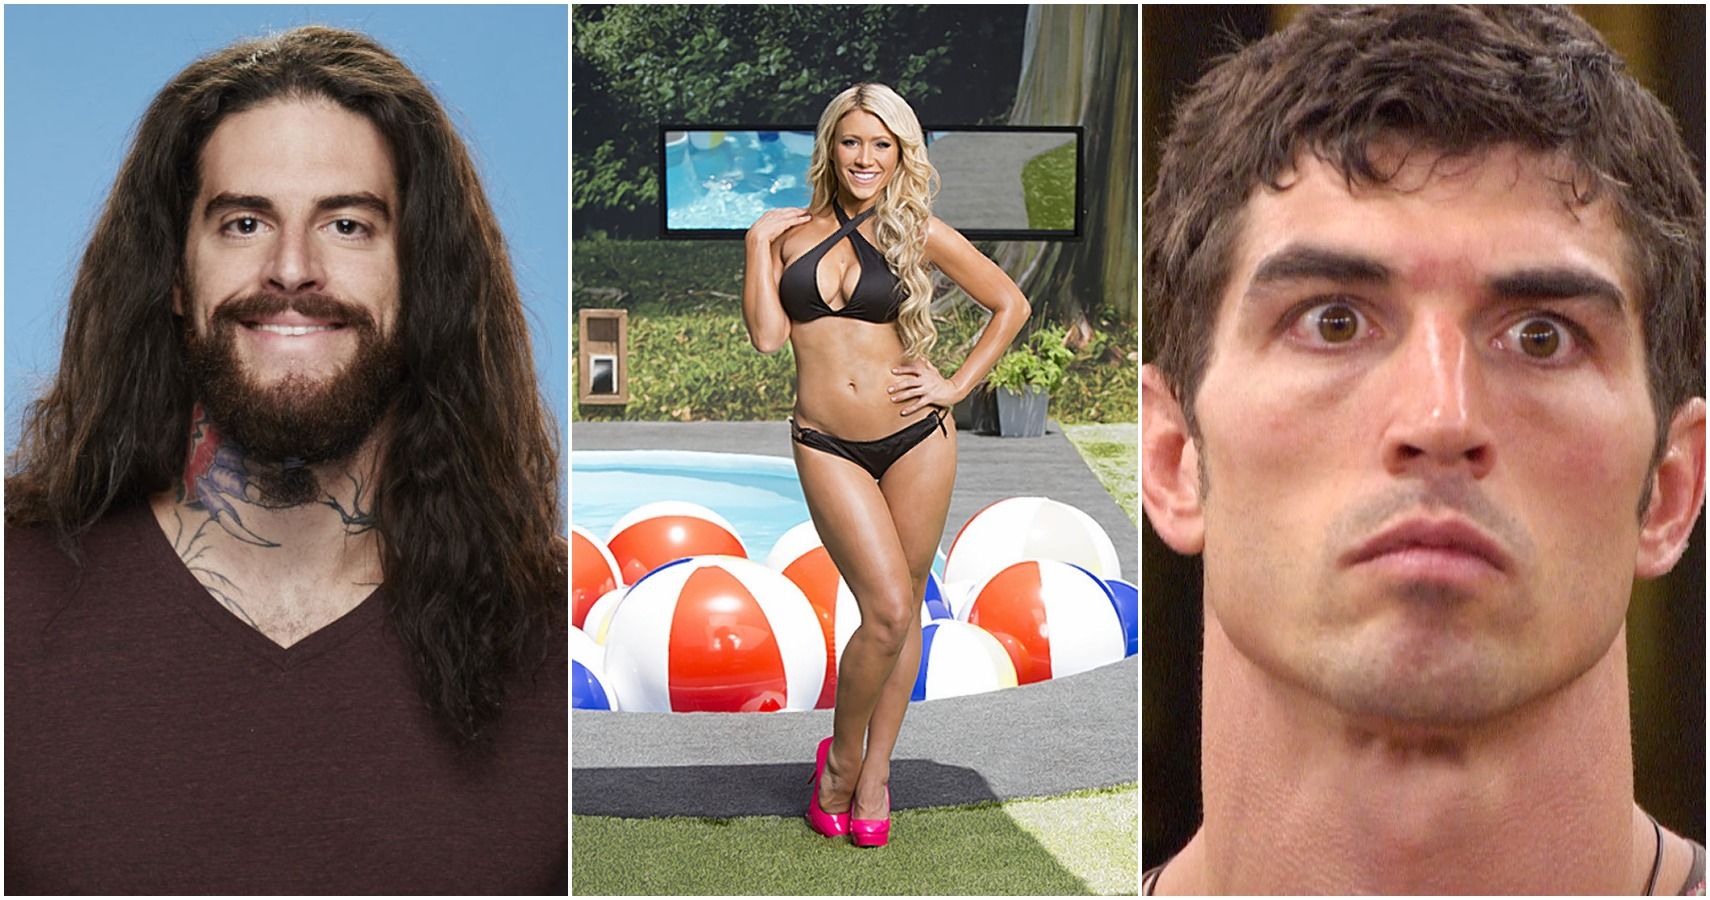 Big Brother 22 10 Players We'd Hate To See As AllStars